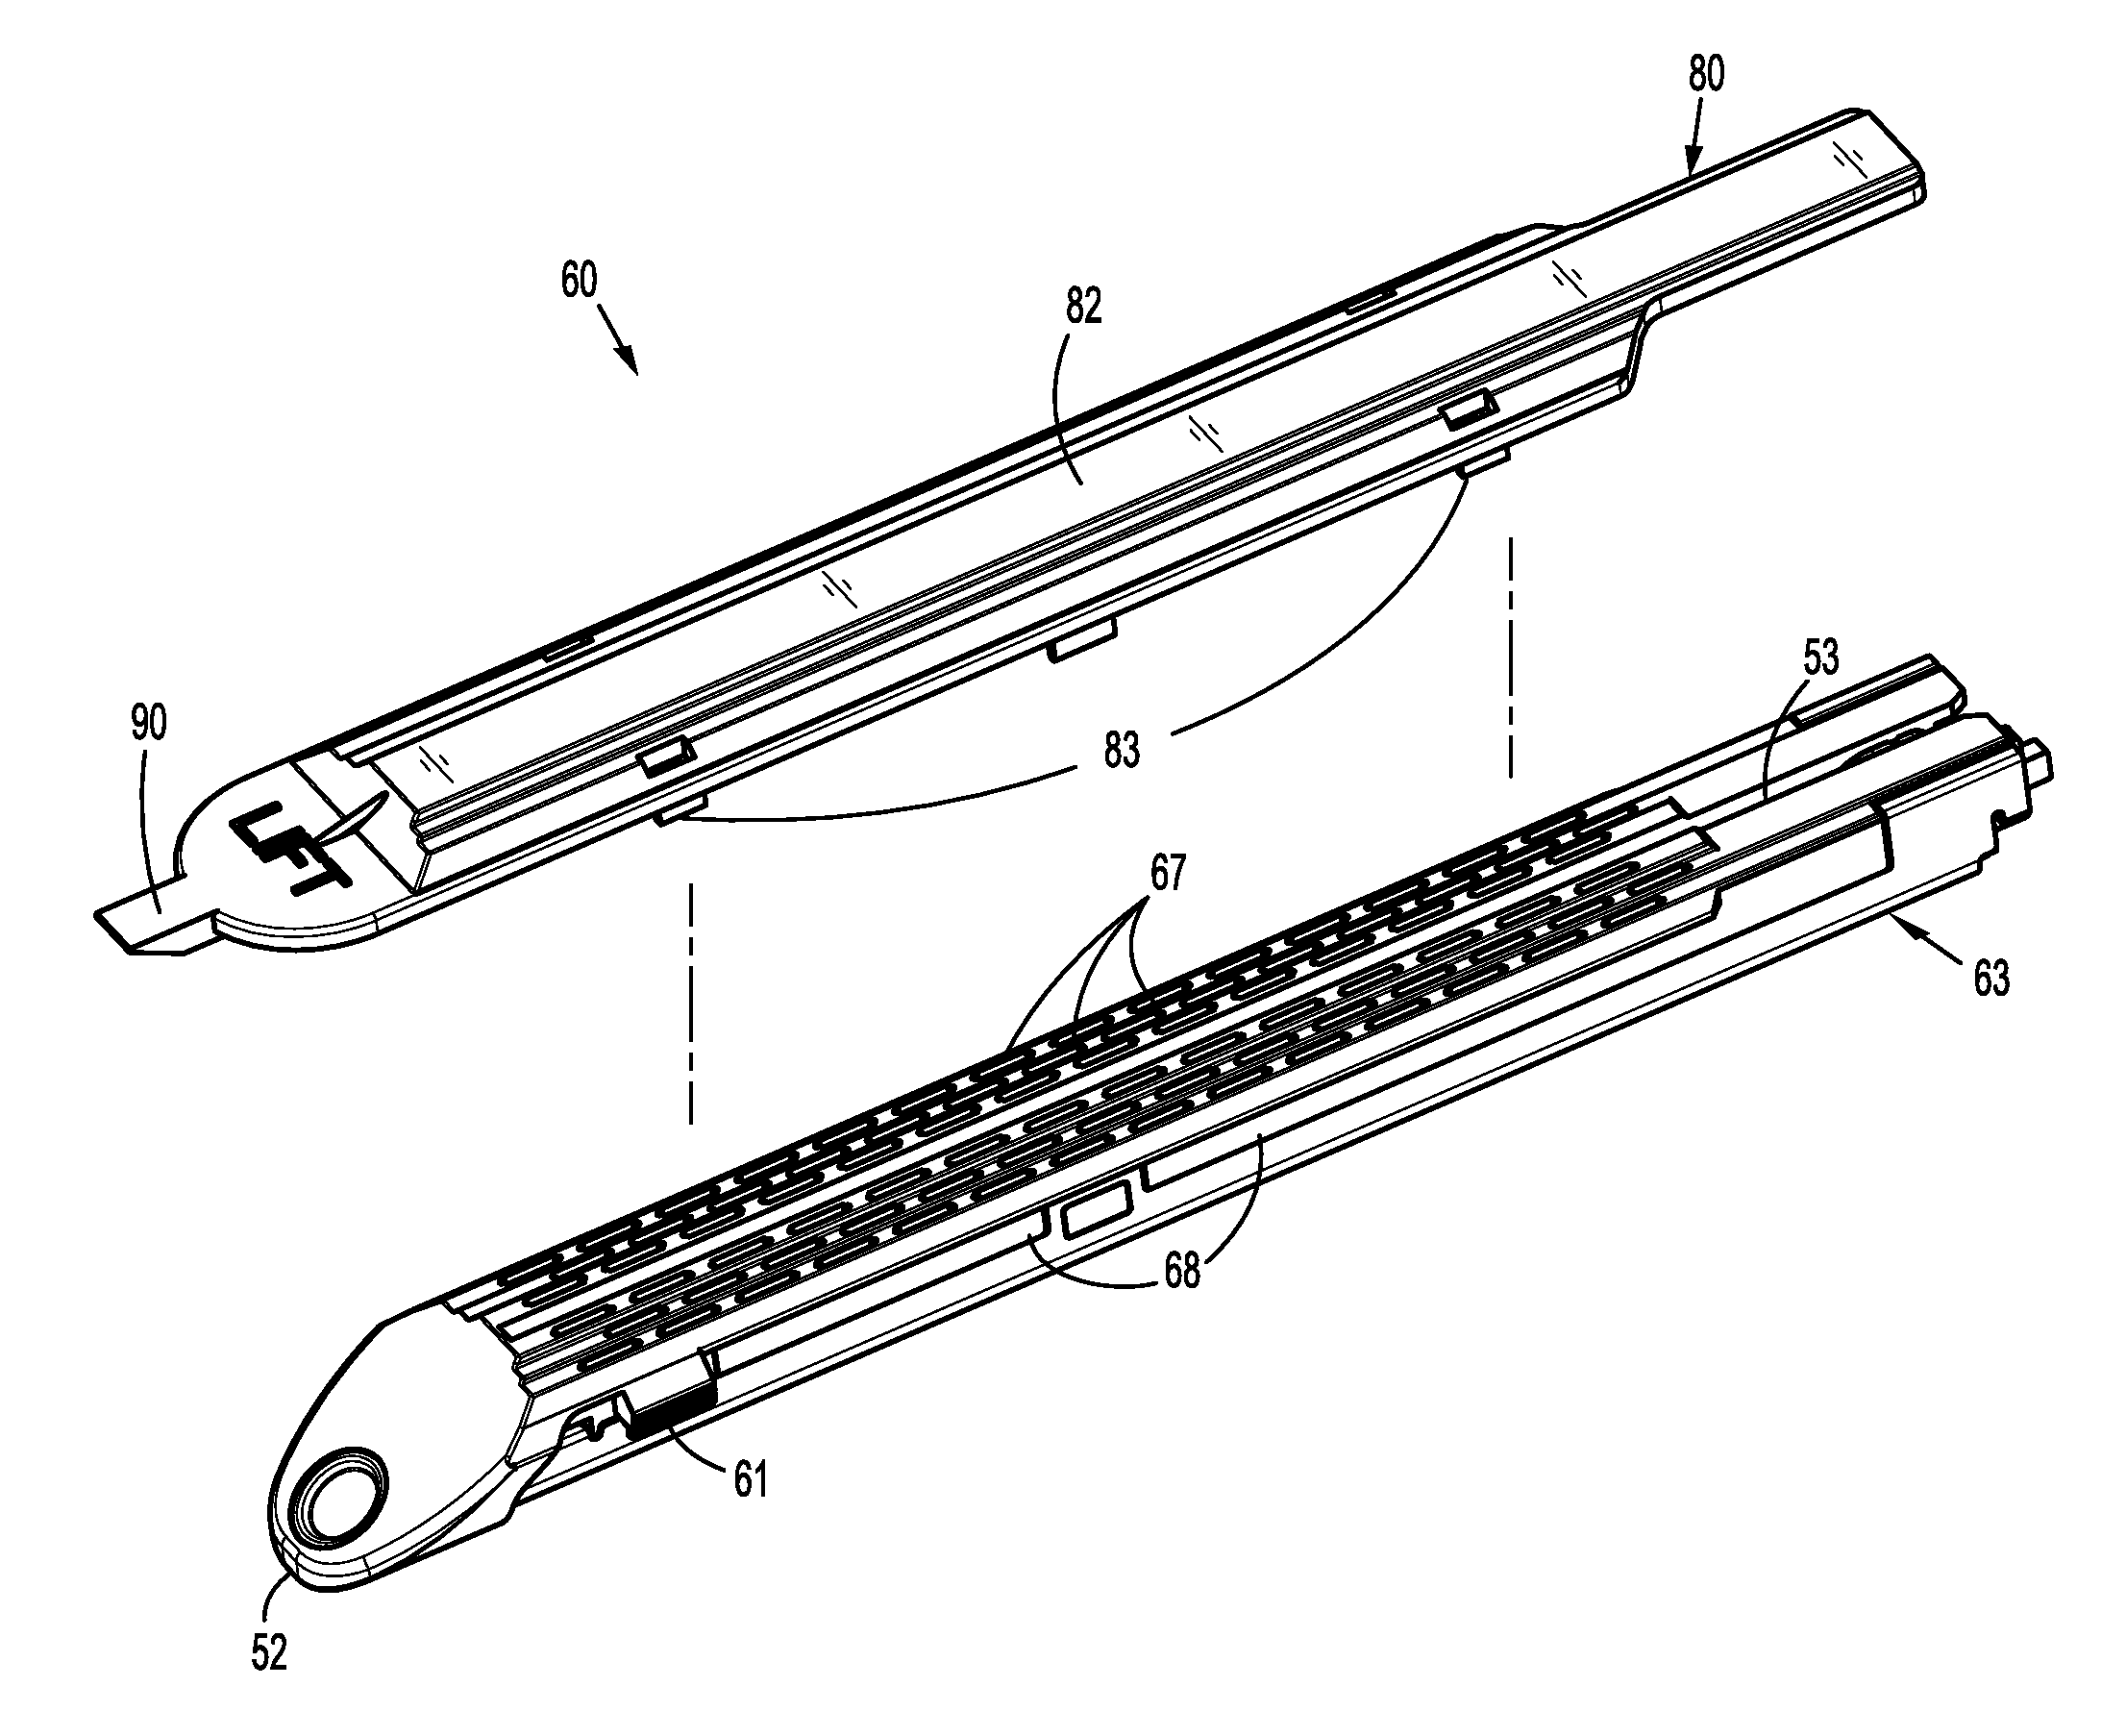 Staple cartridge with shipping wedge